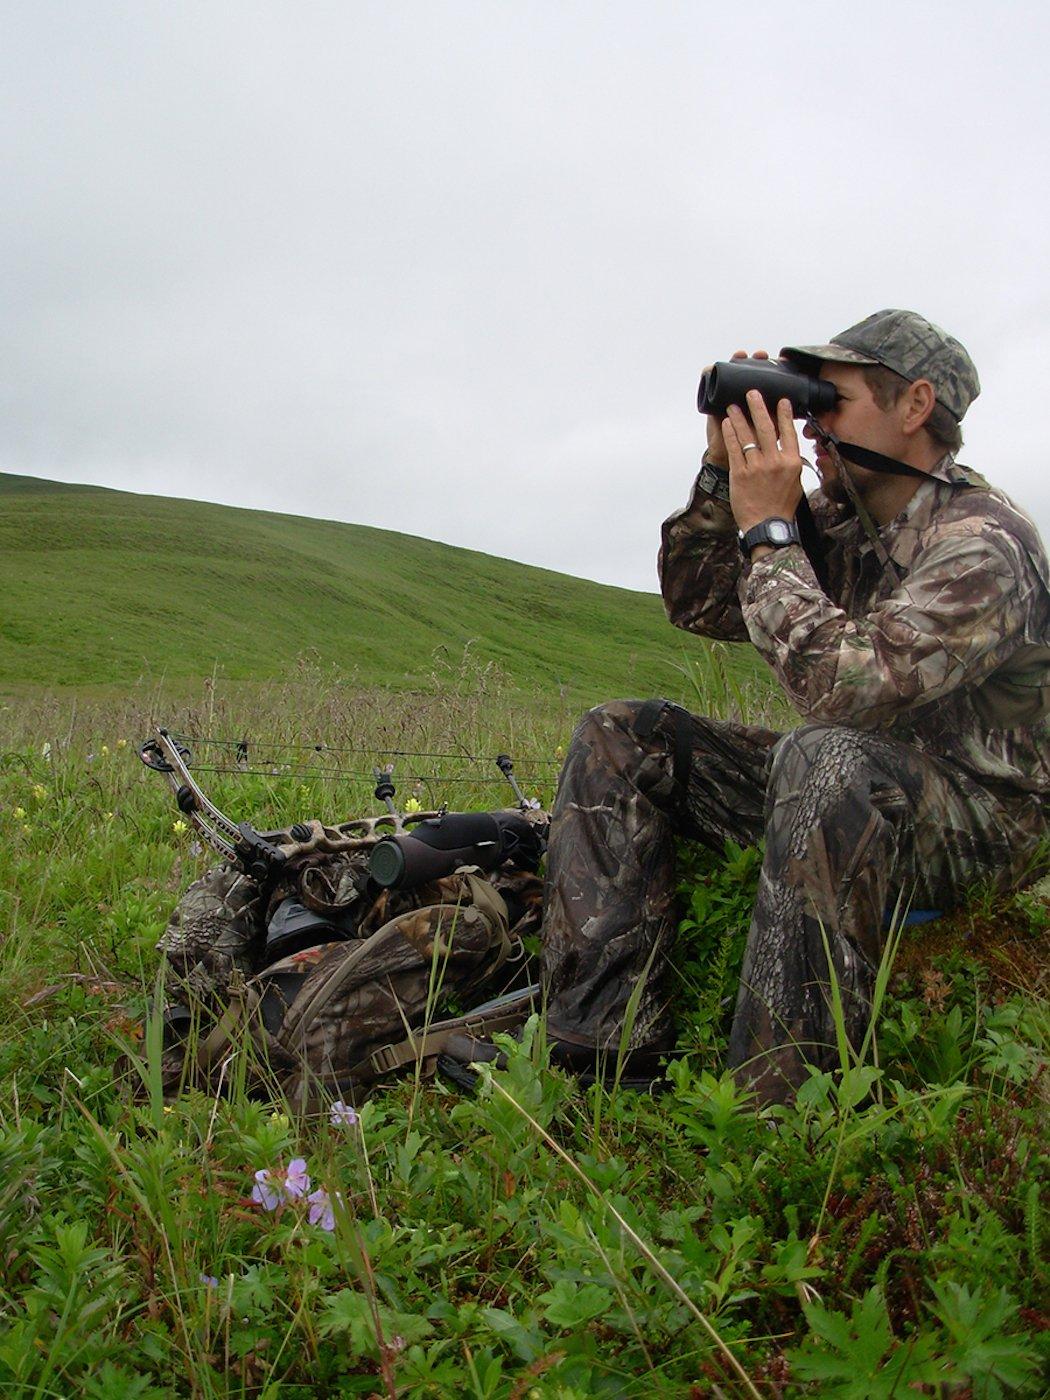 Having the right gear is crucial, especially when hunting in rugged terrain. (Joe Bell photo)